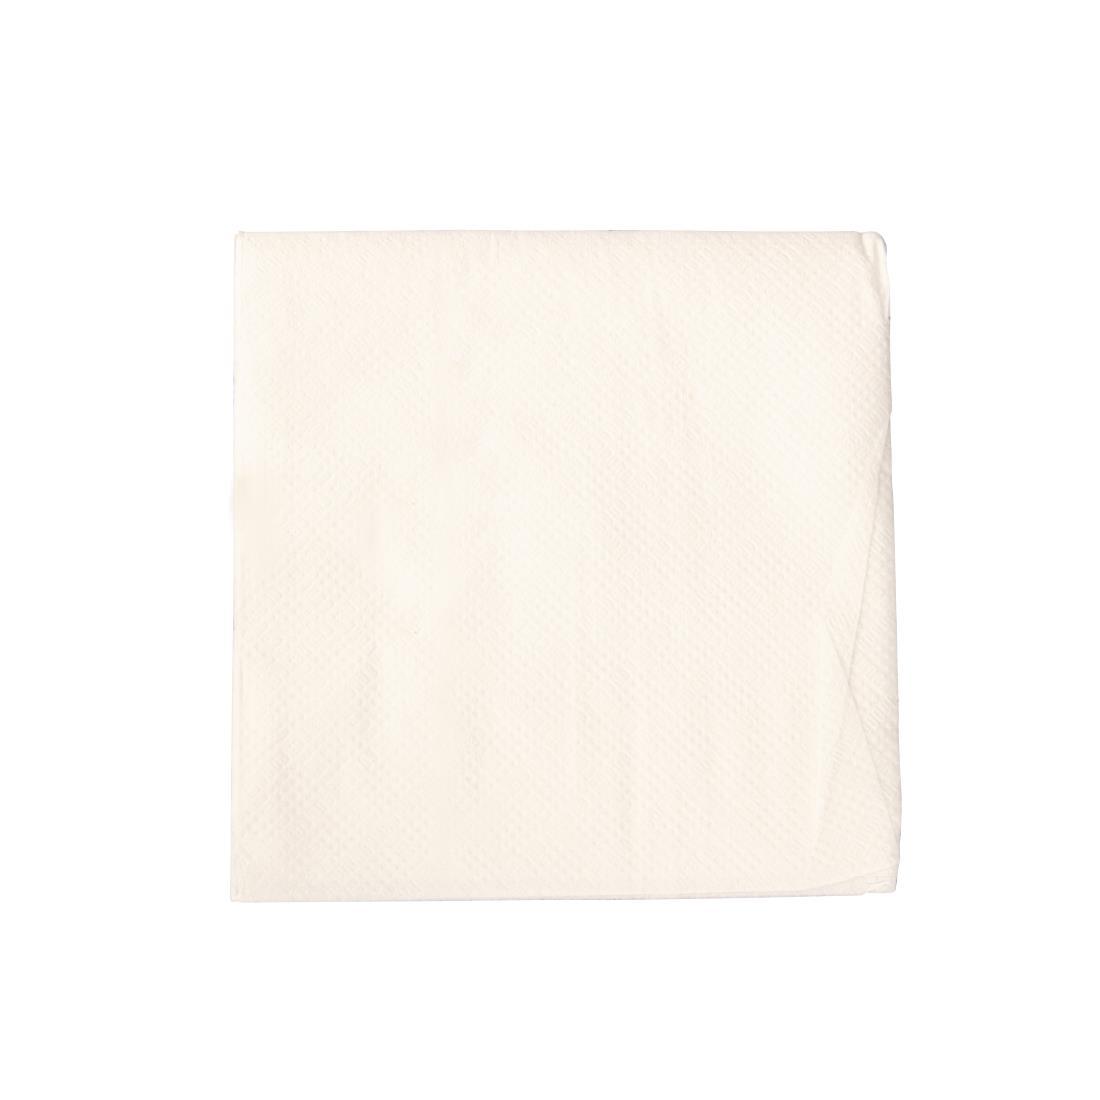 Fiesta Recyclable Cocktail Napkin White 24x24cm 1ply 1/4 Fold (Pack of 250) - CM561  - 1